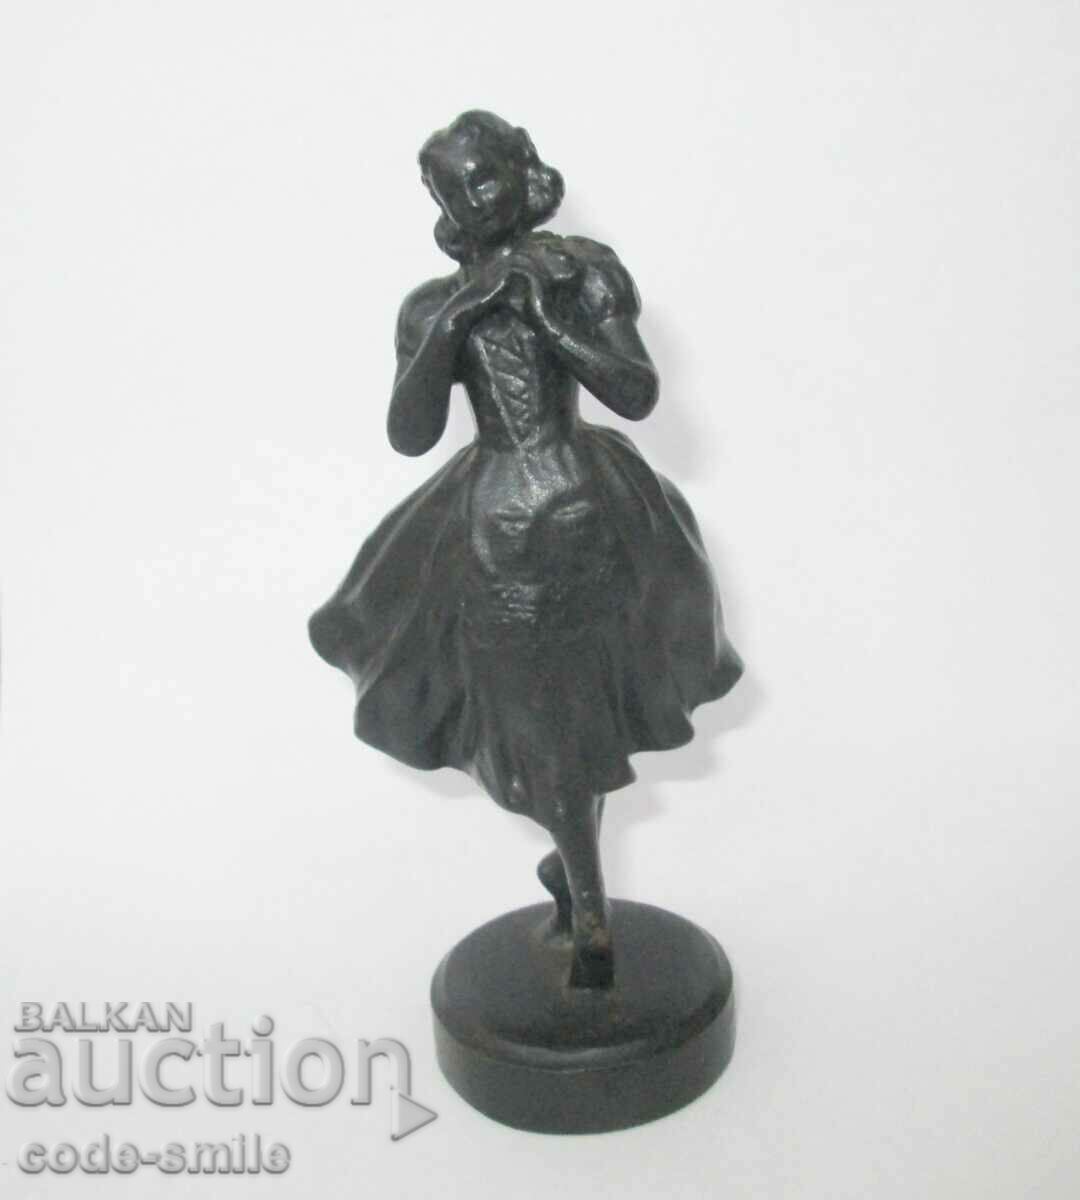 Old Russian USSR author's statuette figure of a ballerina